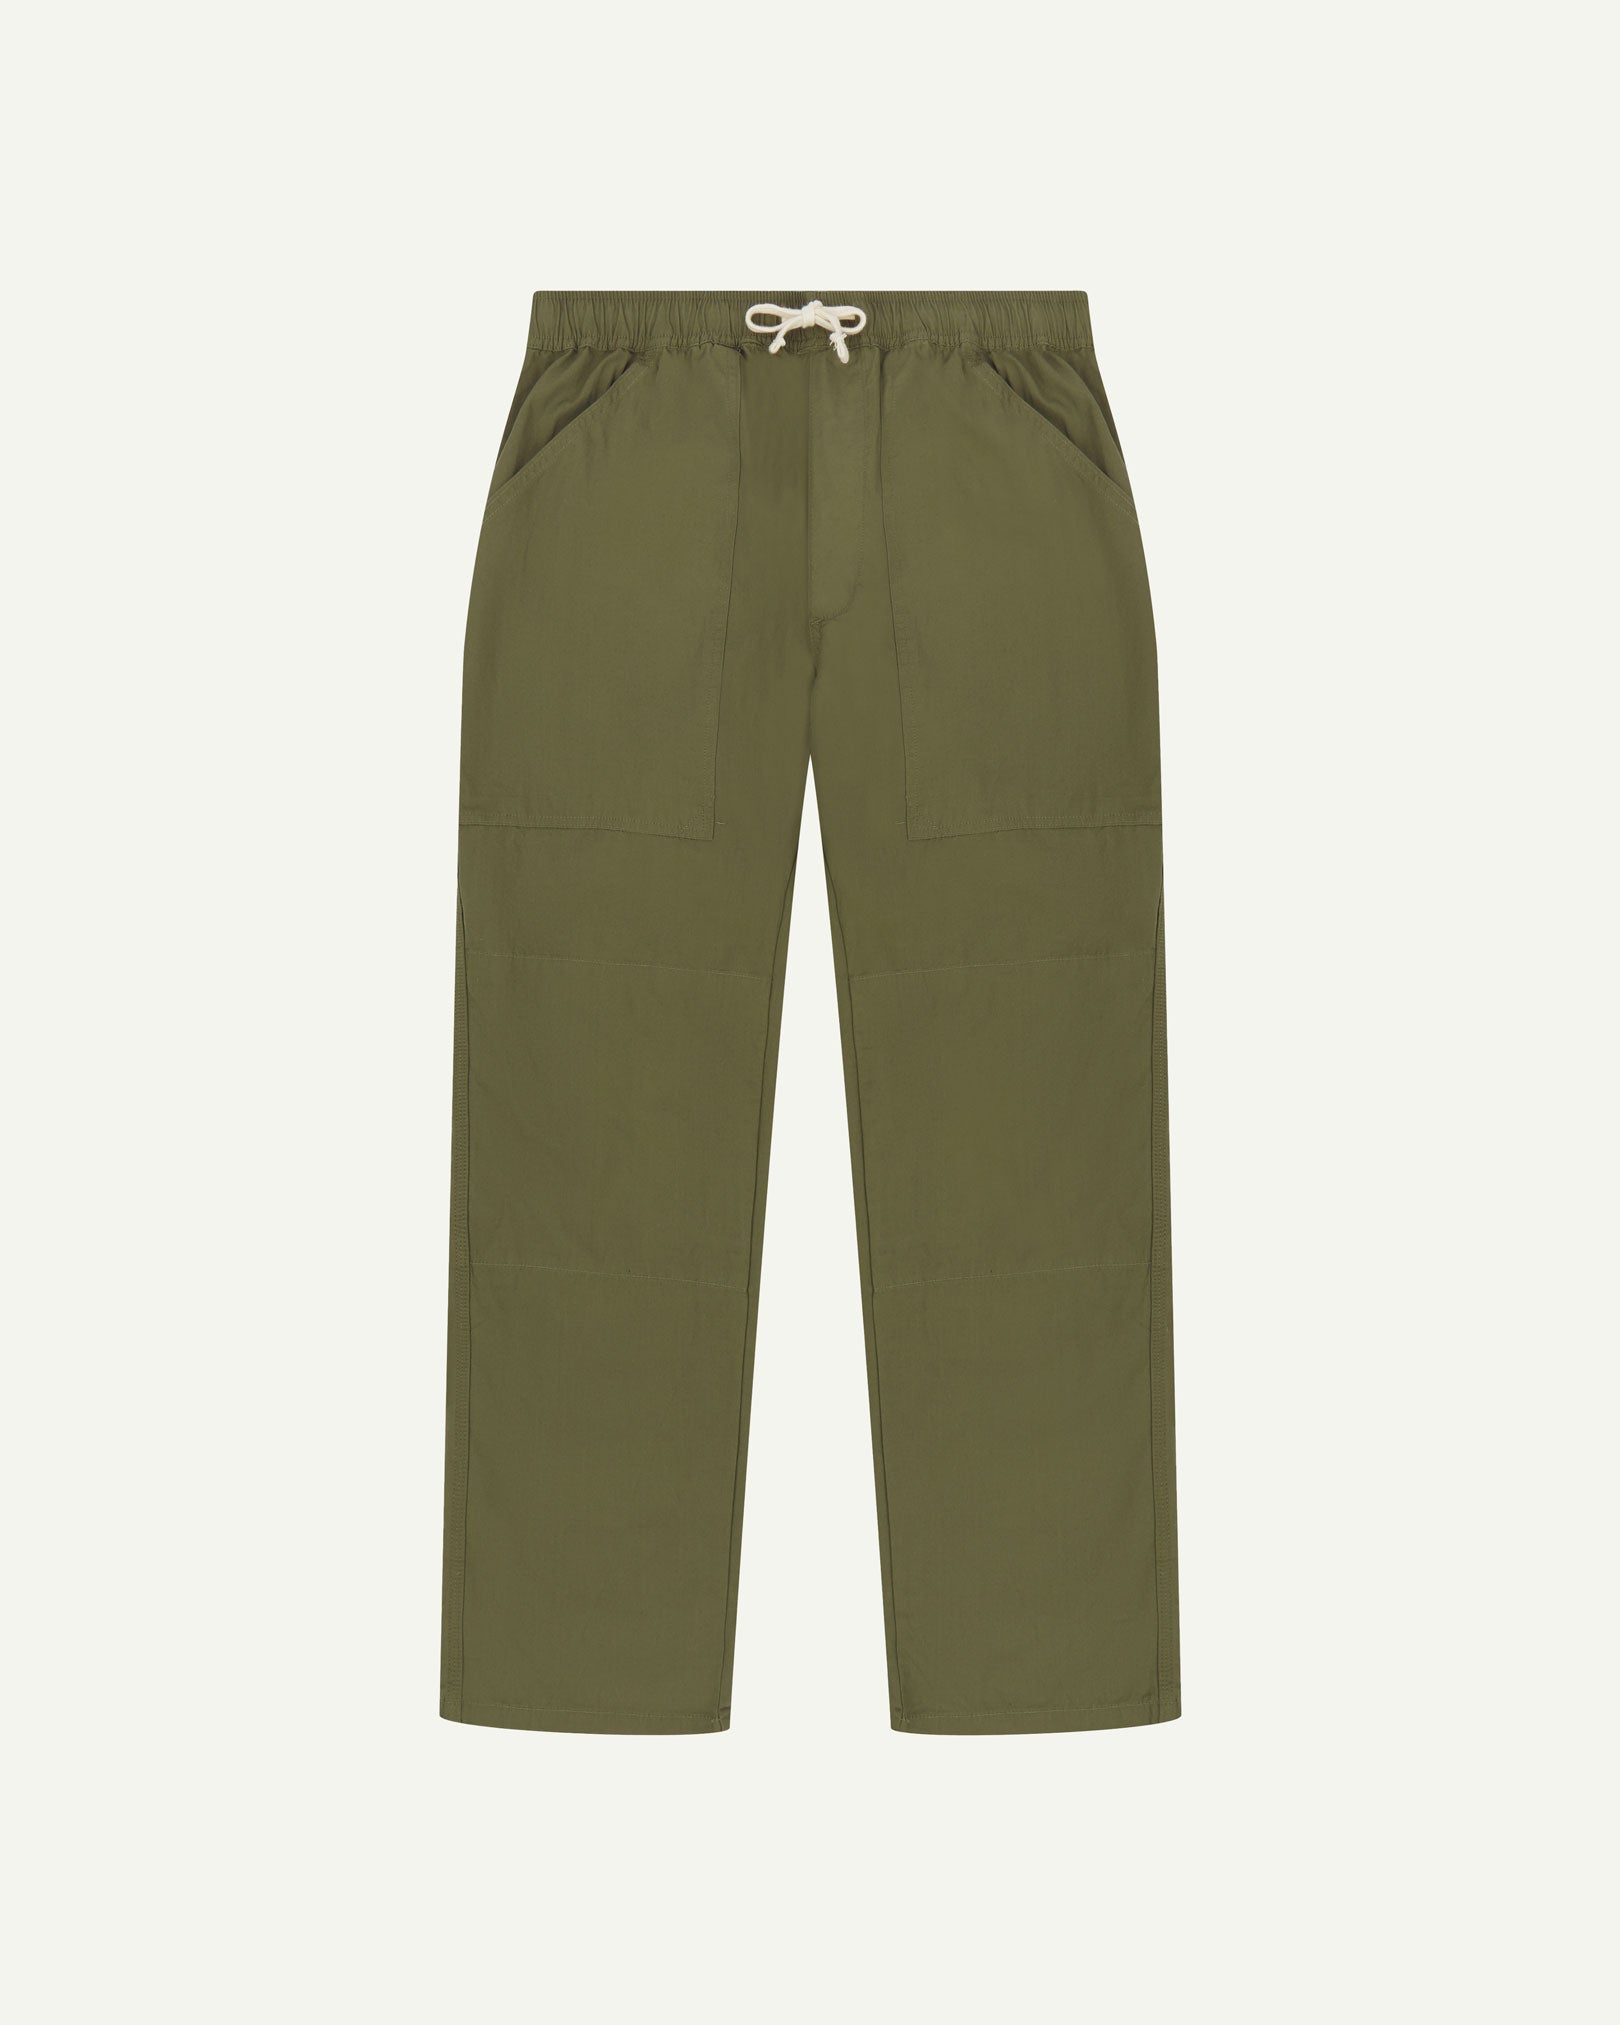 Flat front shot of the Uskees 5020 olive-green lightweight utility pants showing drawstring waist, reinforced knees and large front pockets.